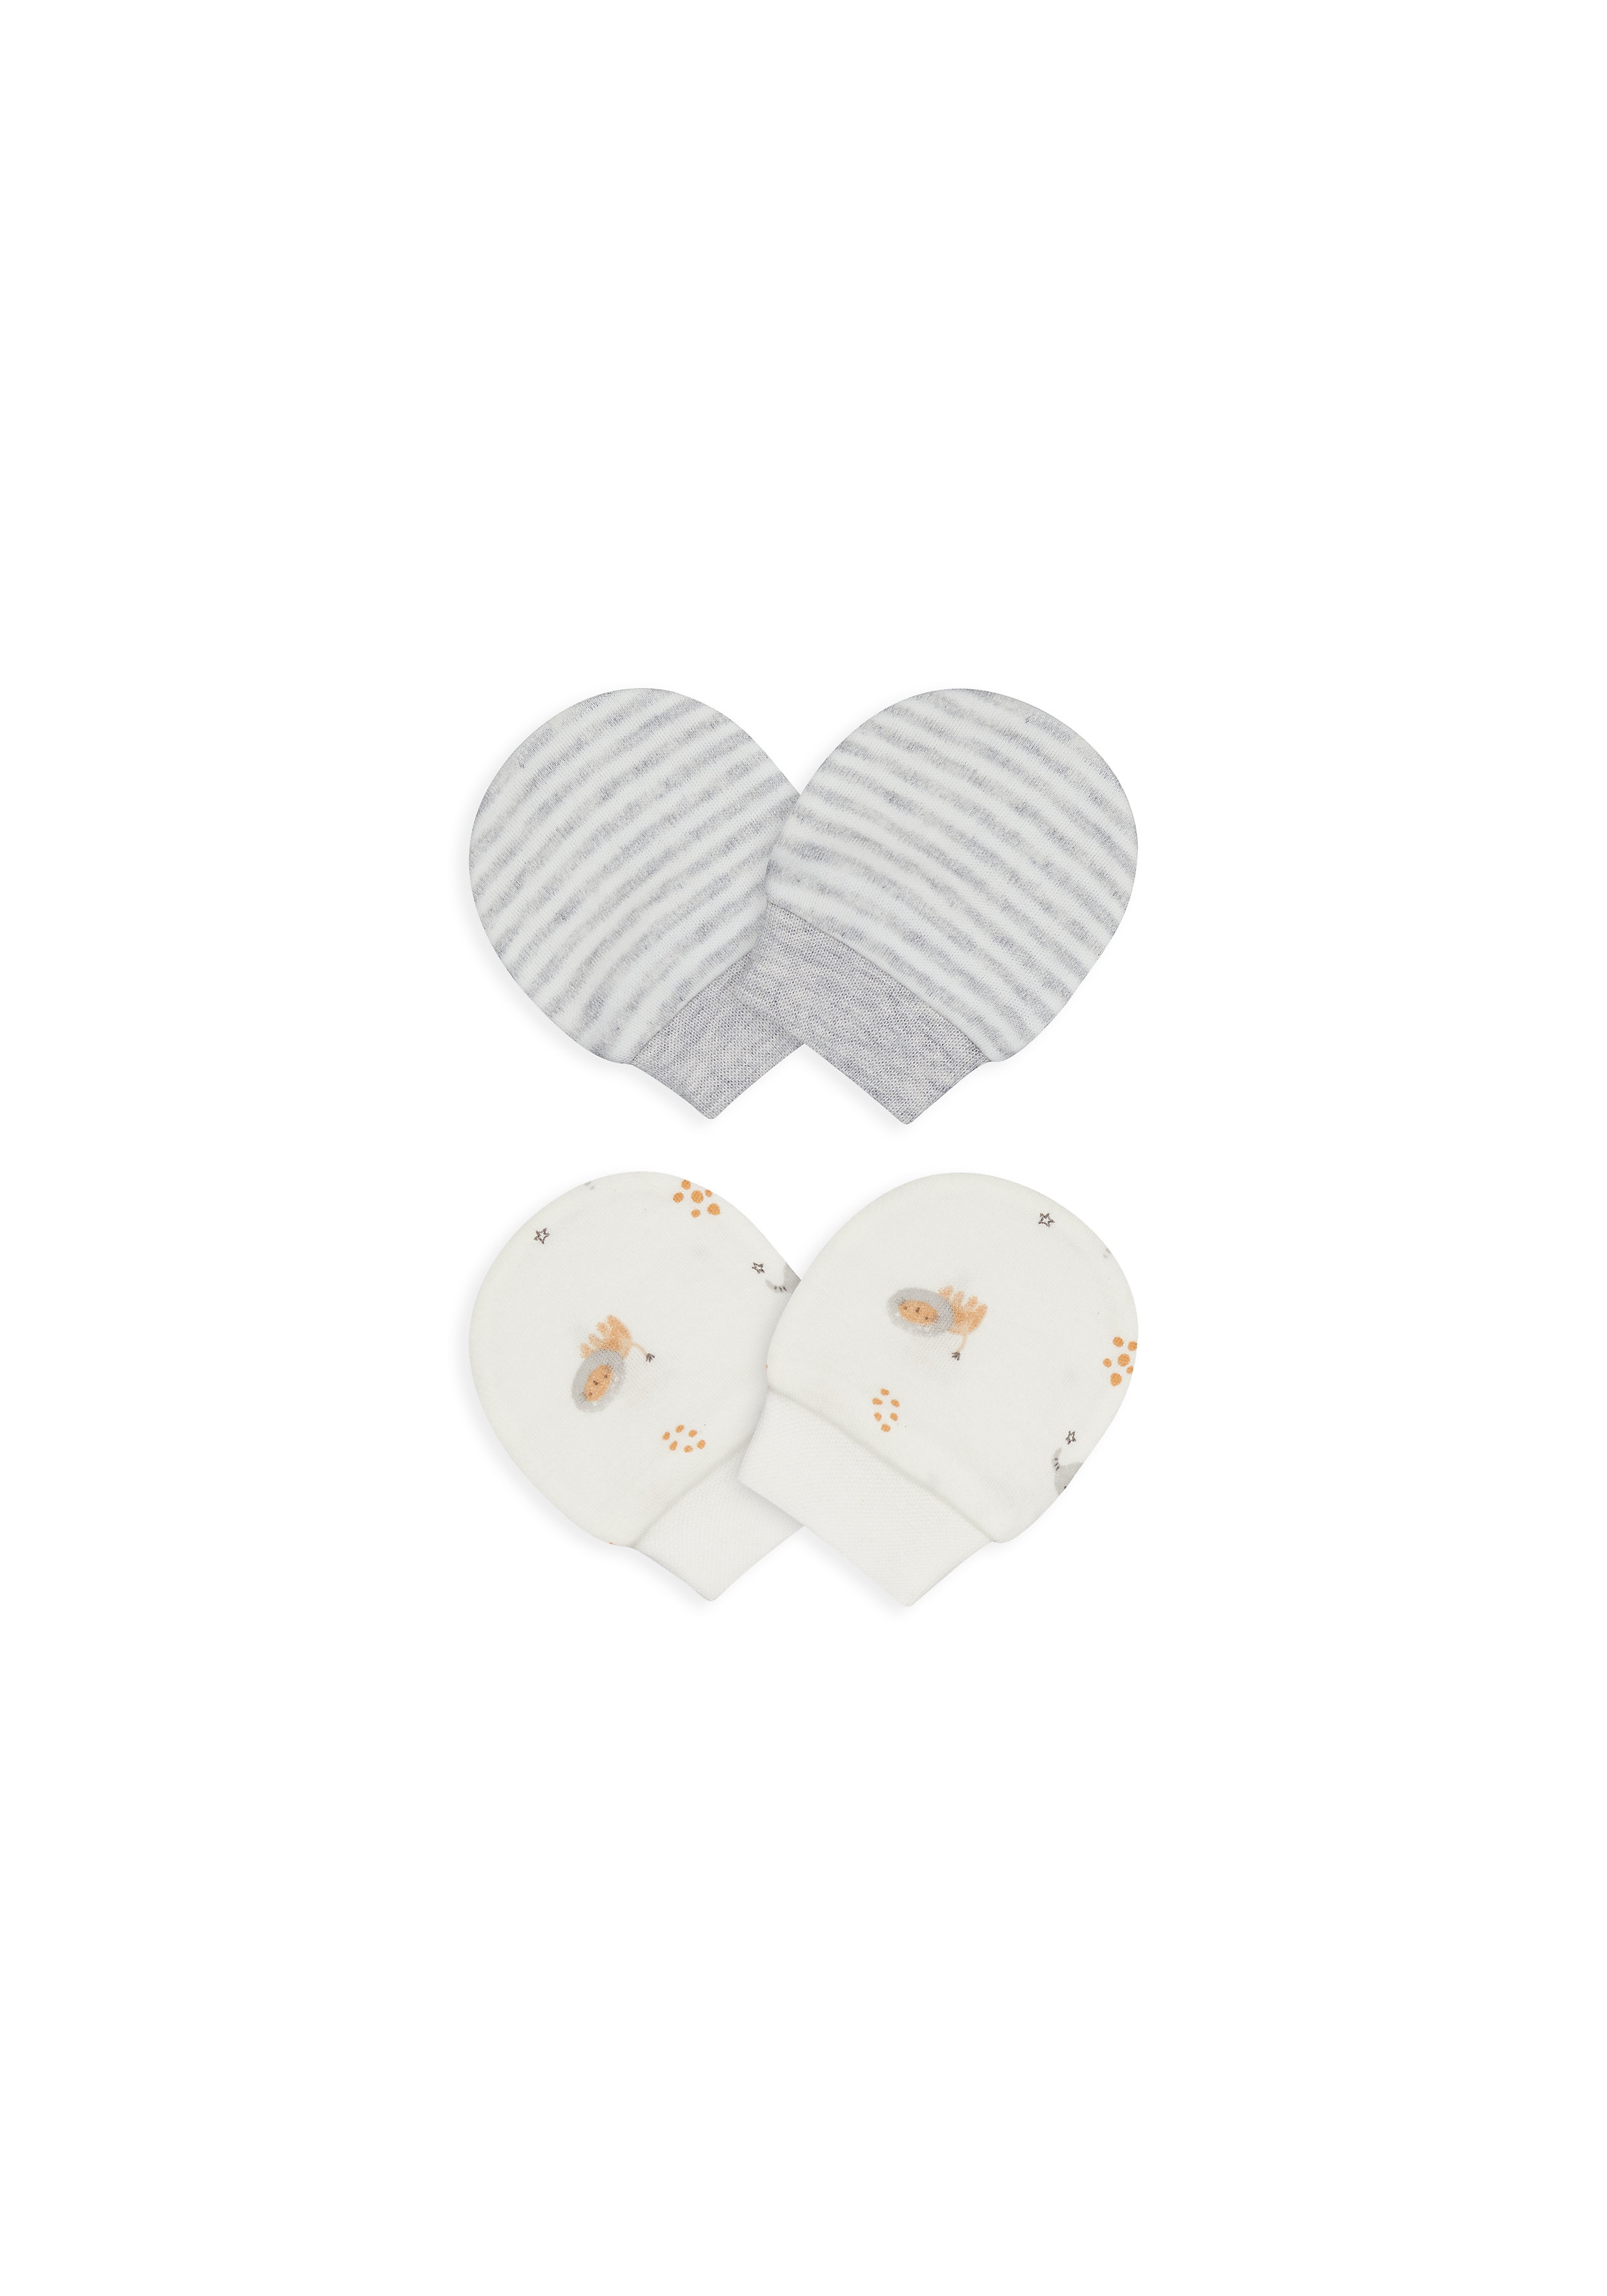 Mothercare | Unisex Mitts Striped And Printed - Pack Of 2 - Grey & White